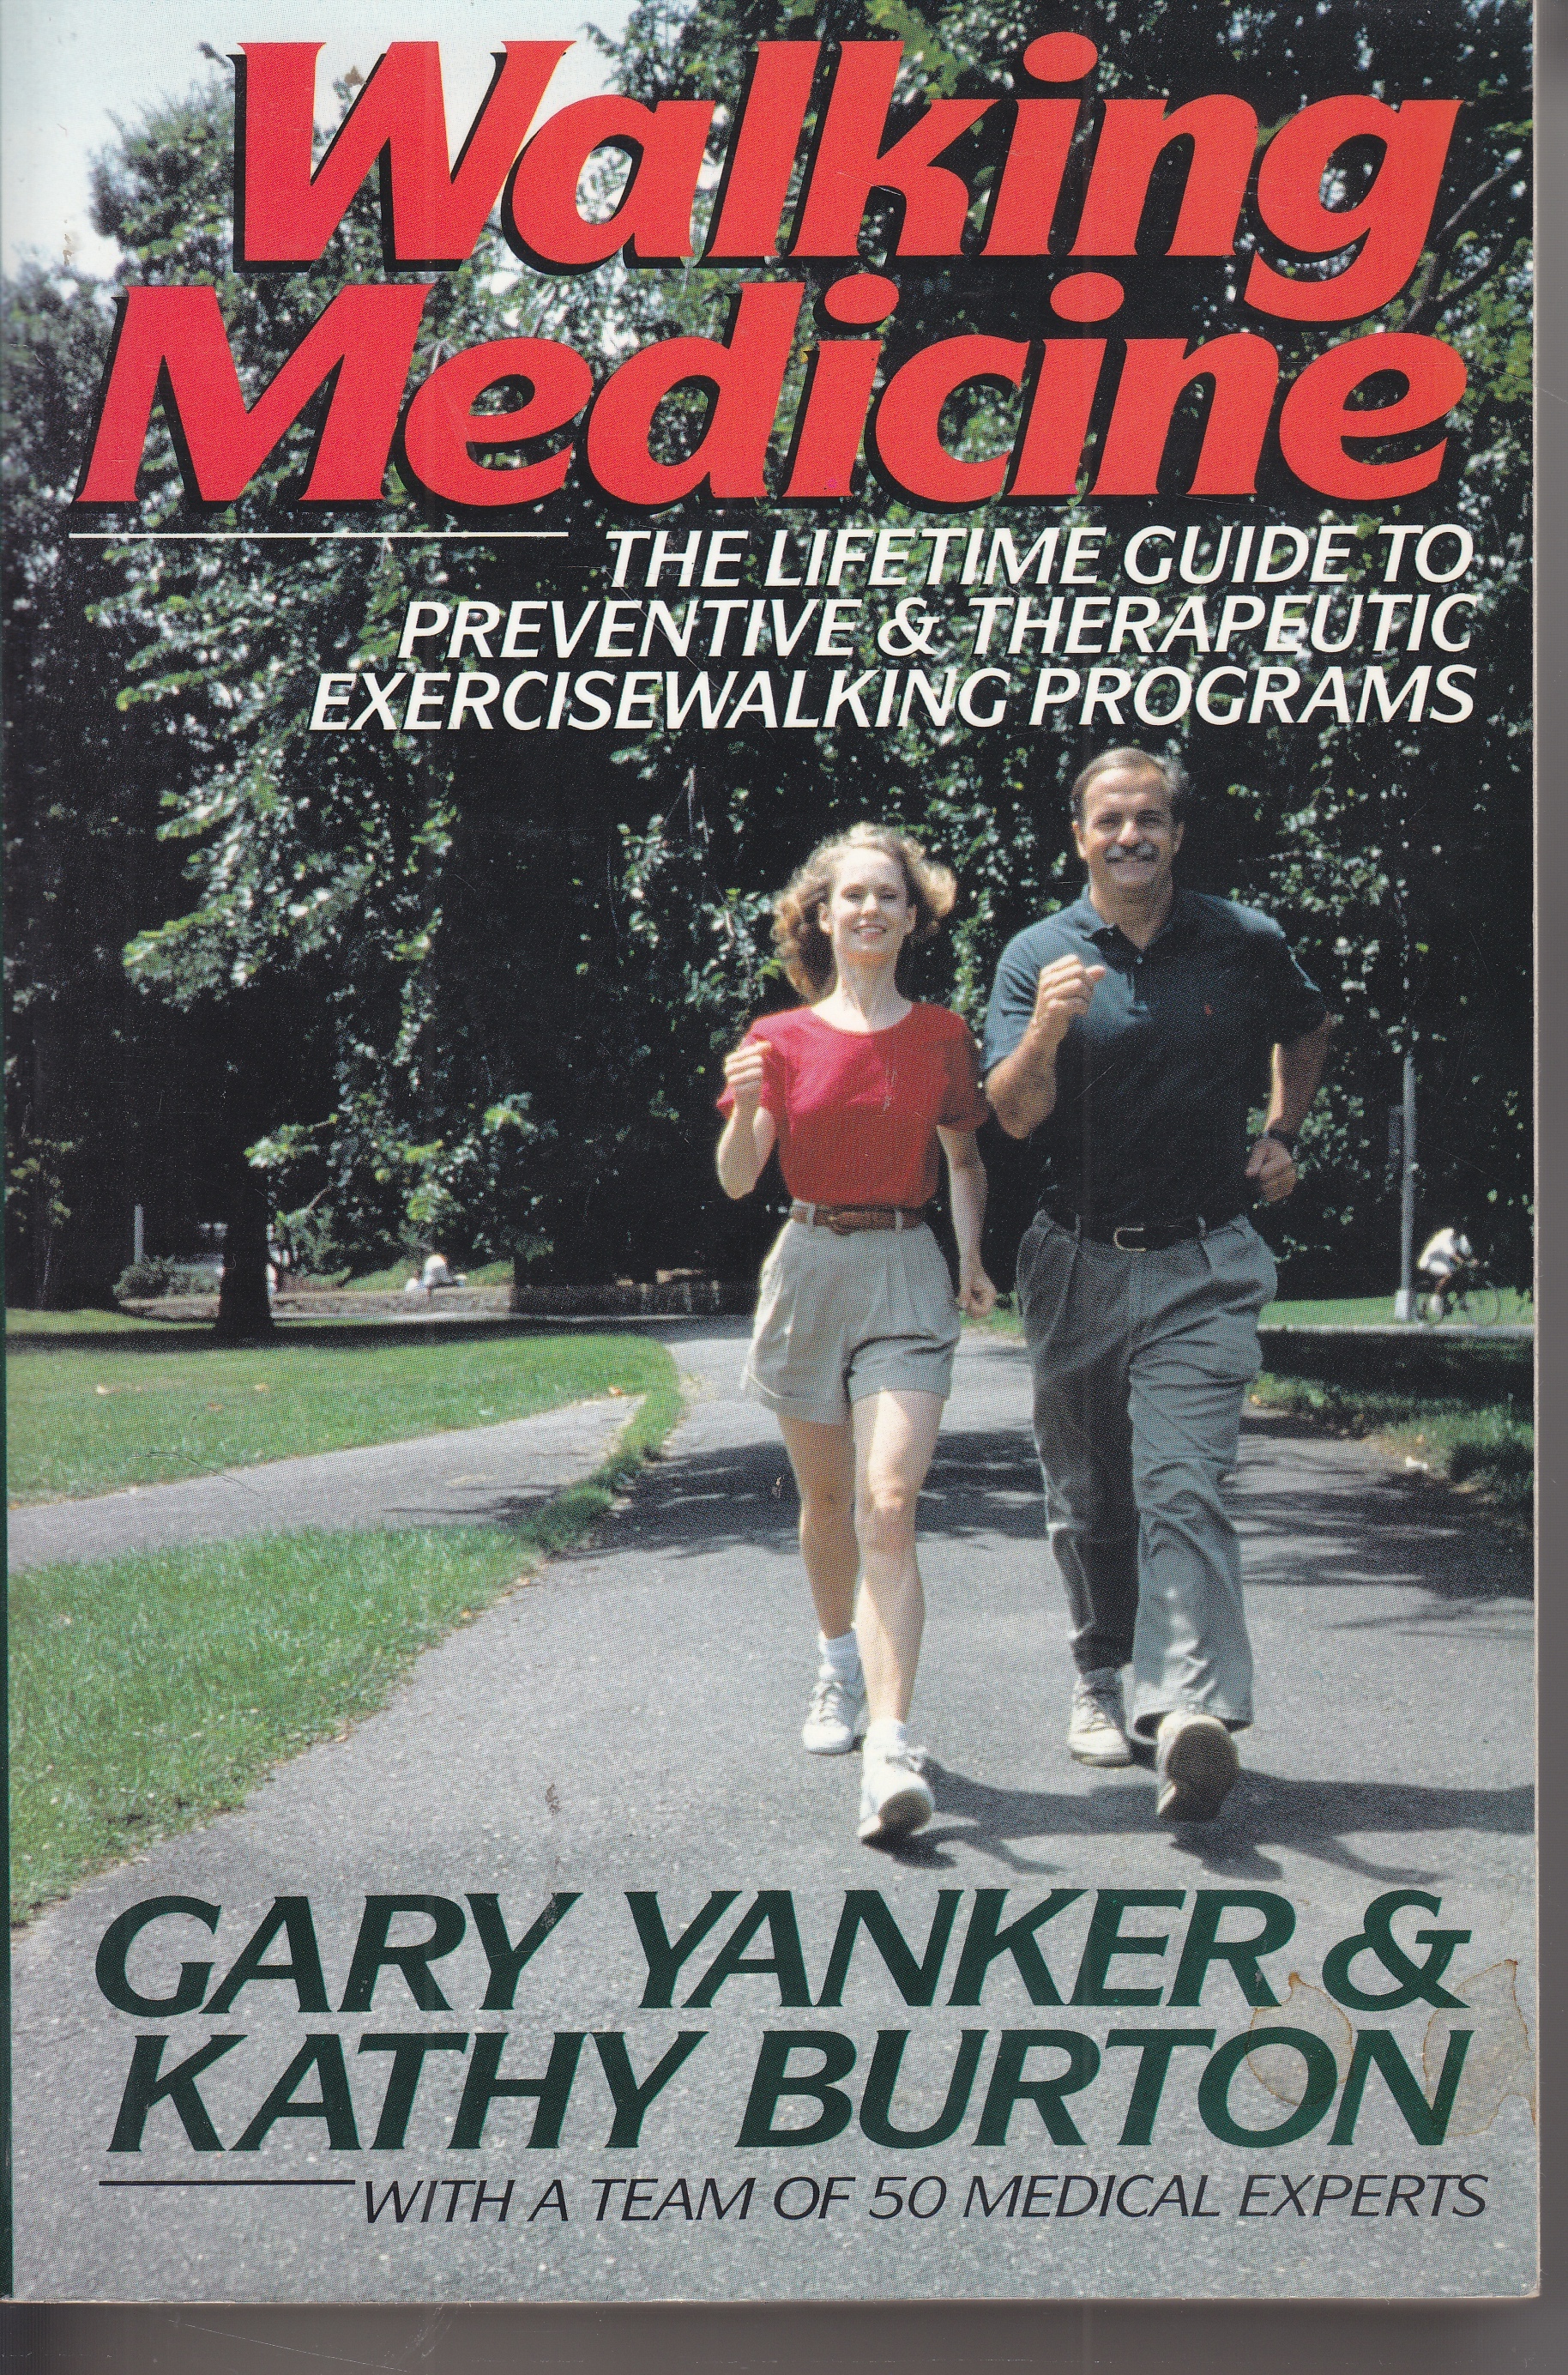 Image for Walking Medicine The Lifetime Guide to Preventive and Therapeutic Exercisewalking Programs